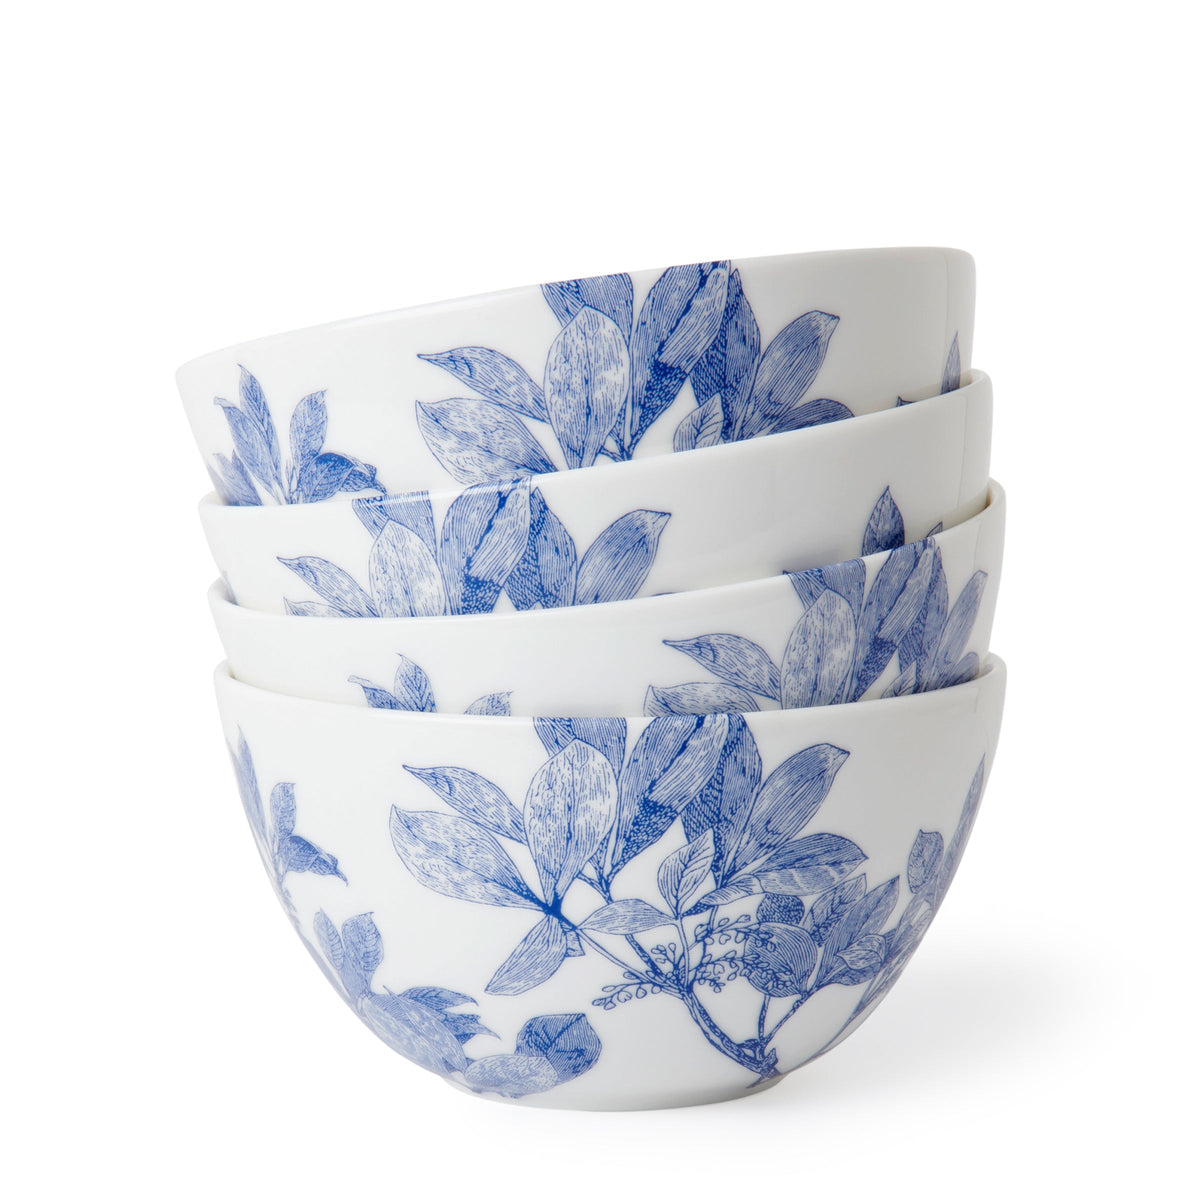 Four delicate Caskata Blue Arbor Tall Cereal Bowls stacked on top of each other in the vintage inspired Blue Arbor collection.